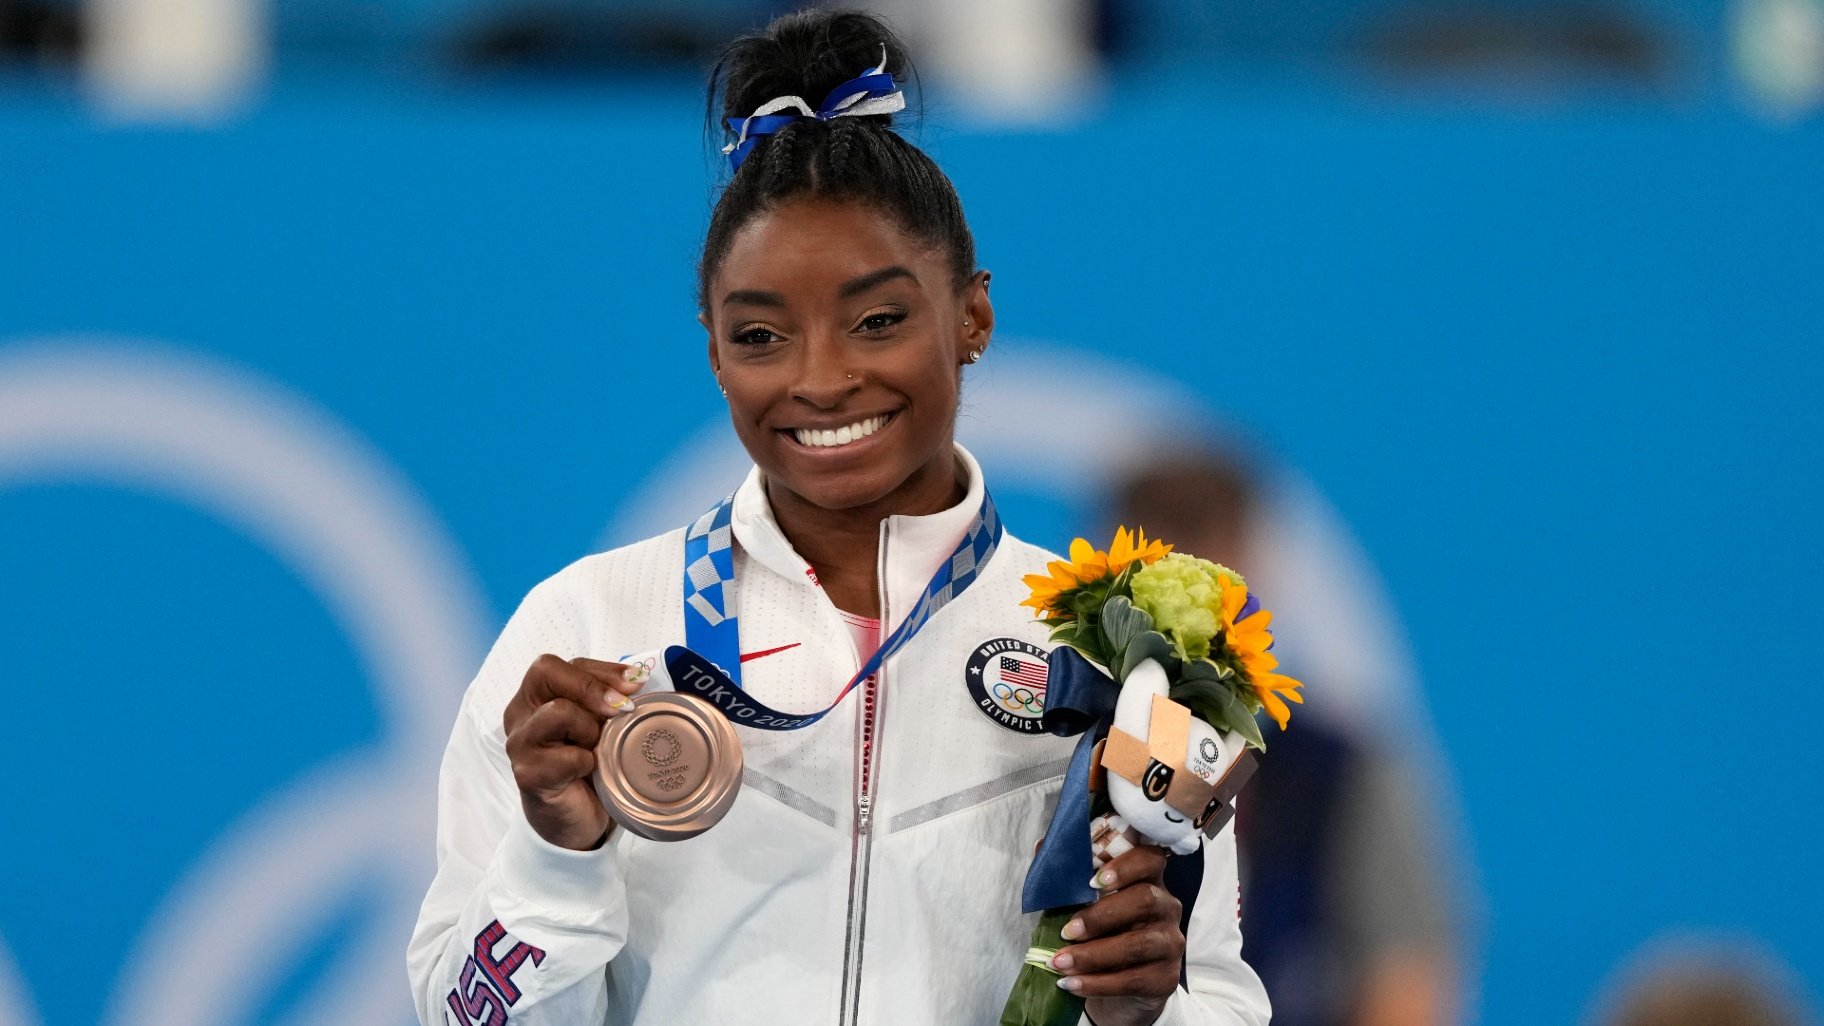 Gymnastics Star Simone Biles to Compete in Chicago Area in First